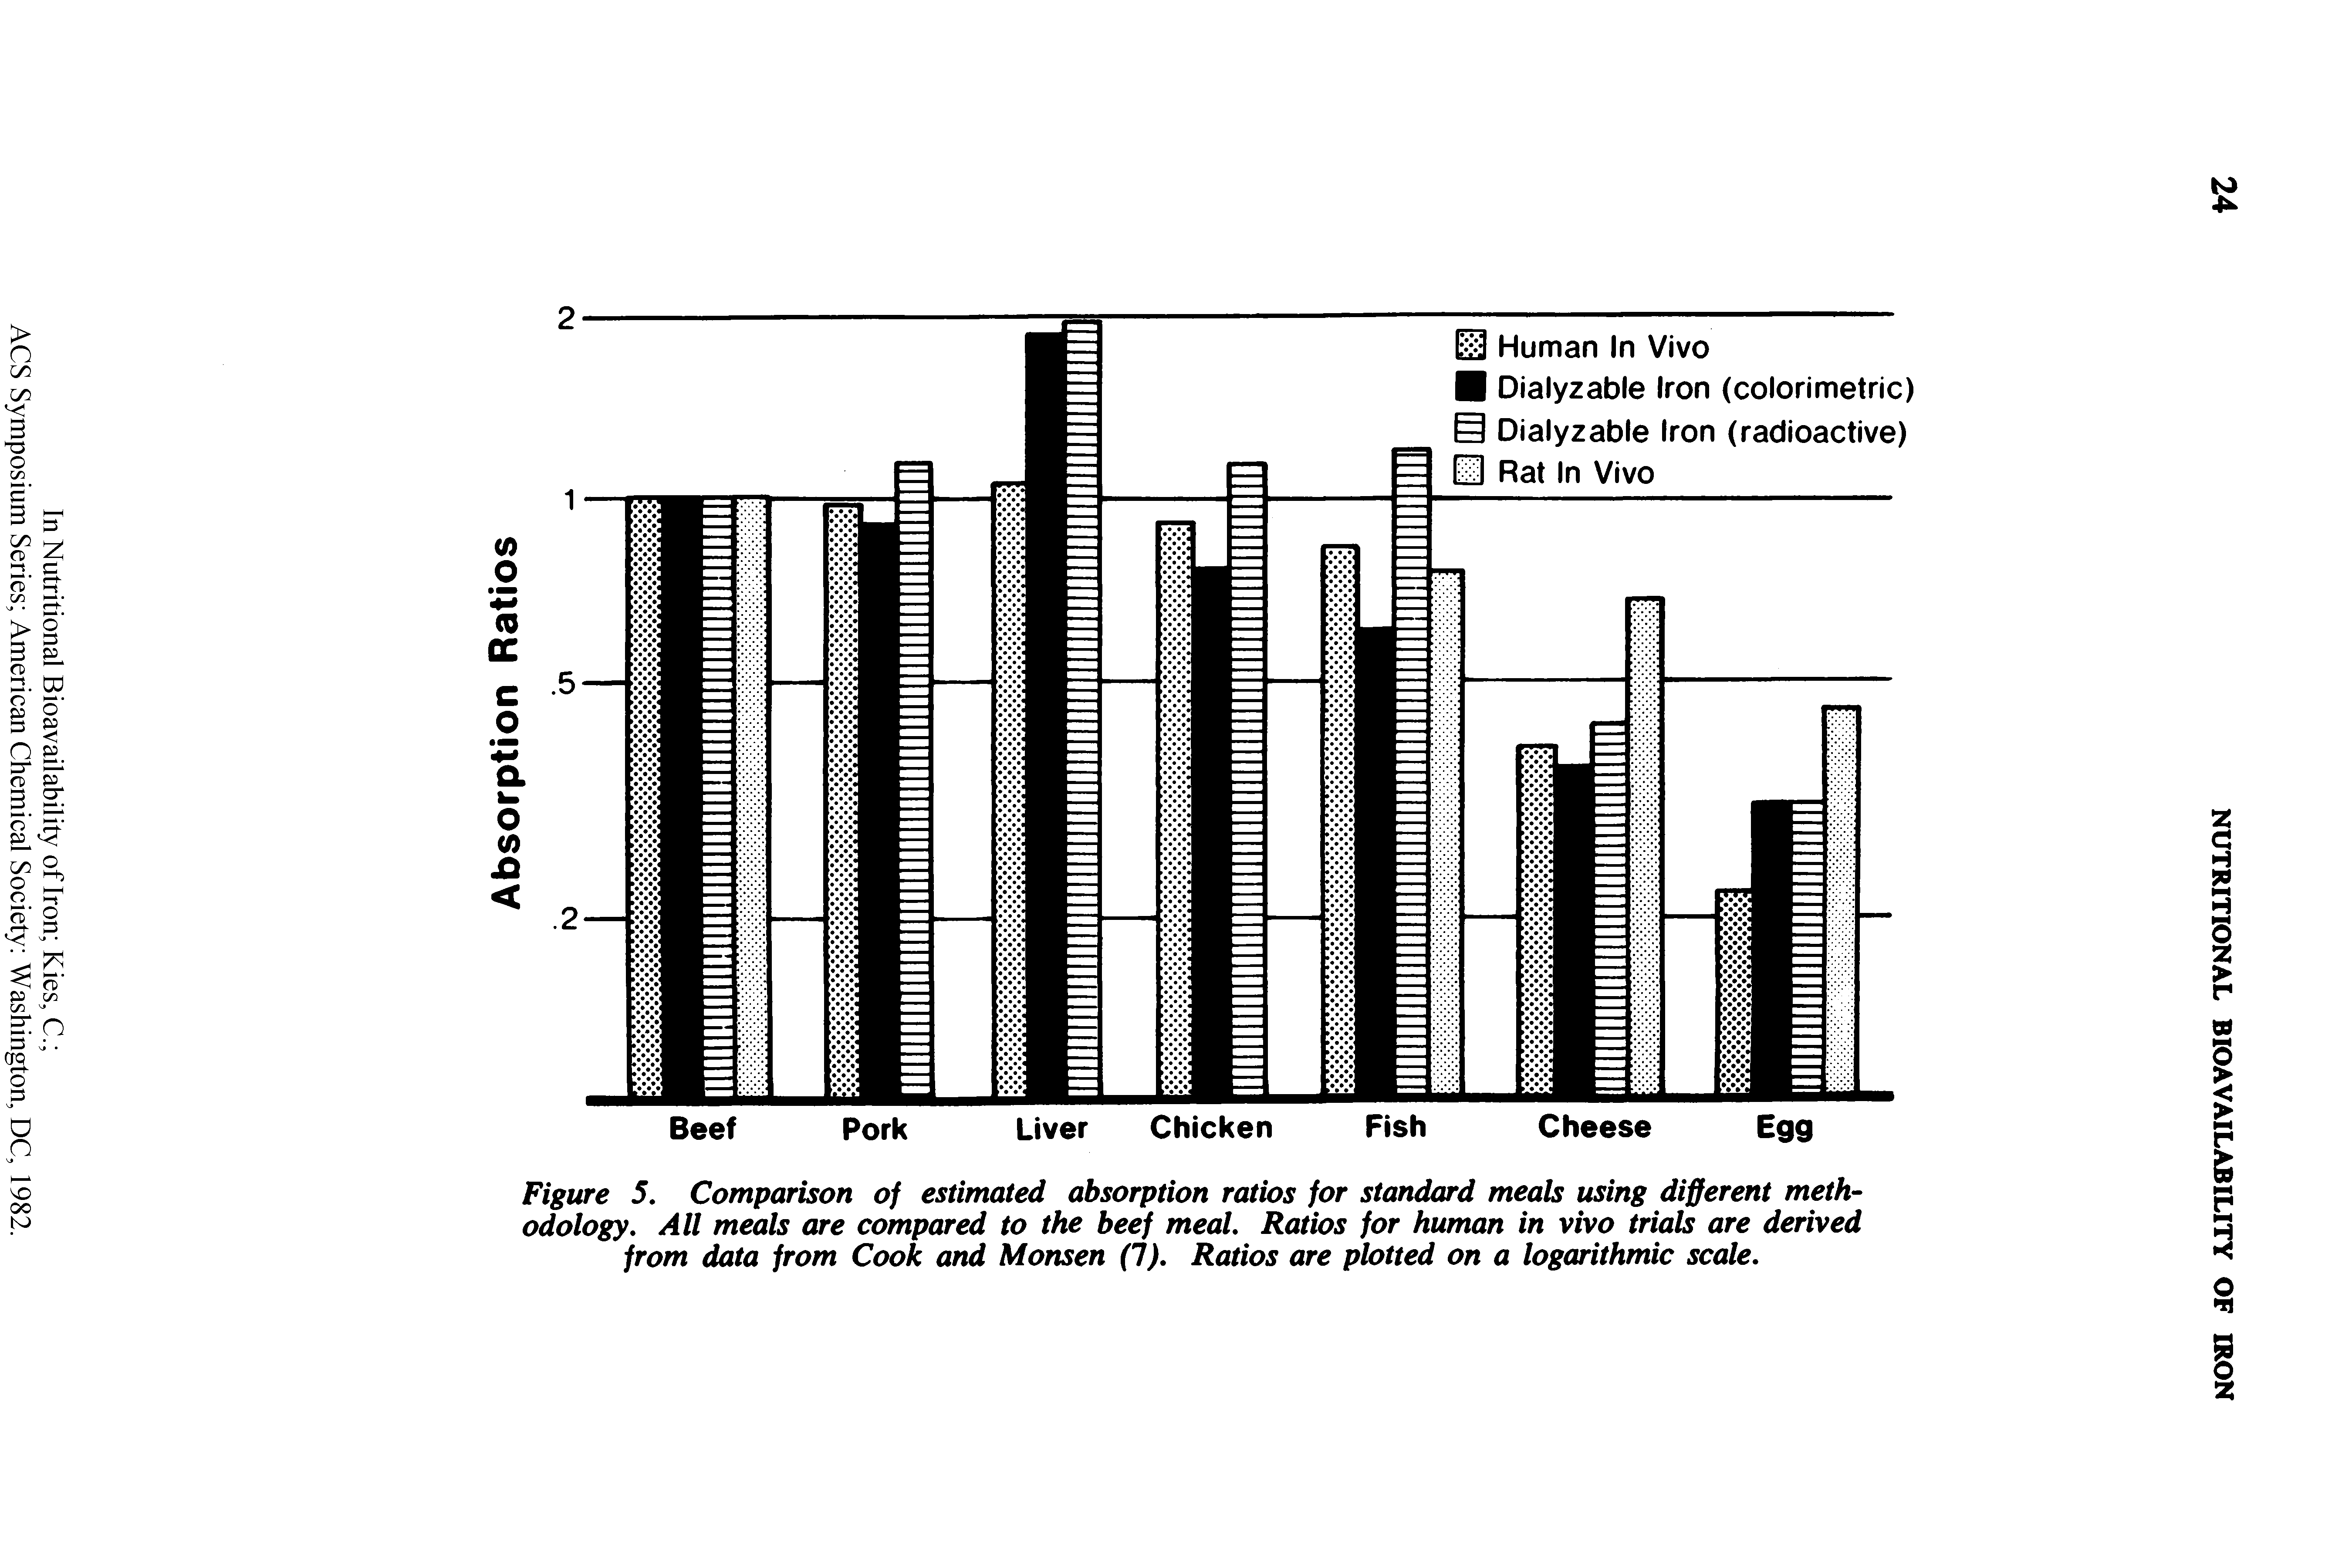 Figure 5. Comparison of estimated absorption ratios for standard meals using different methodology. All meals are compared to the beef meal. Ratios for human in vivo trials are derived from data from Cook and Monsen (1). Ratios are plotted on a logarithmic scale.